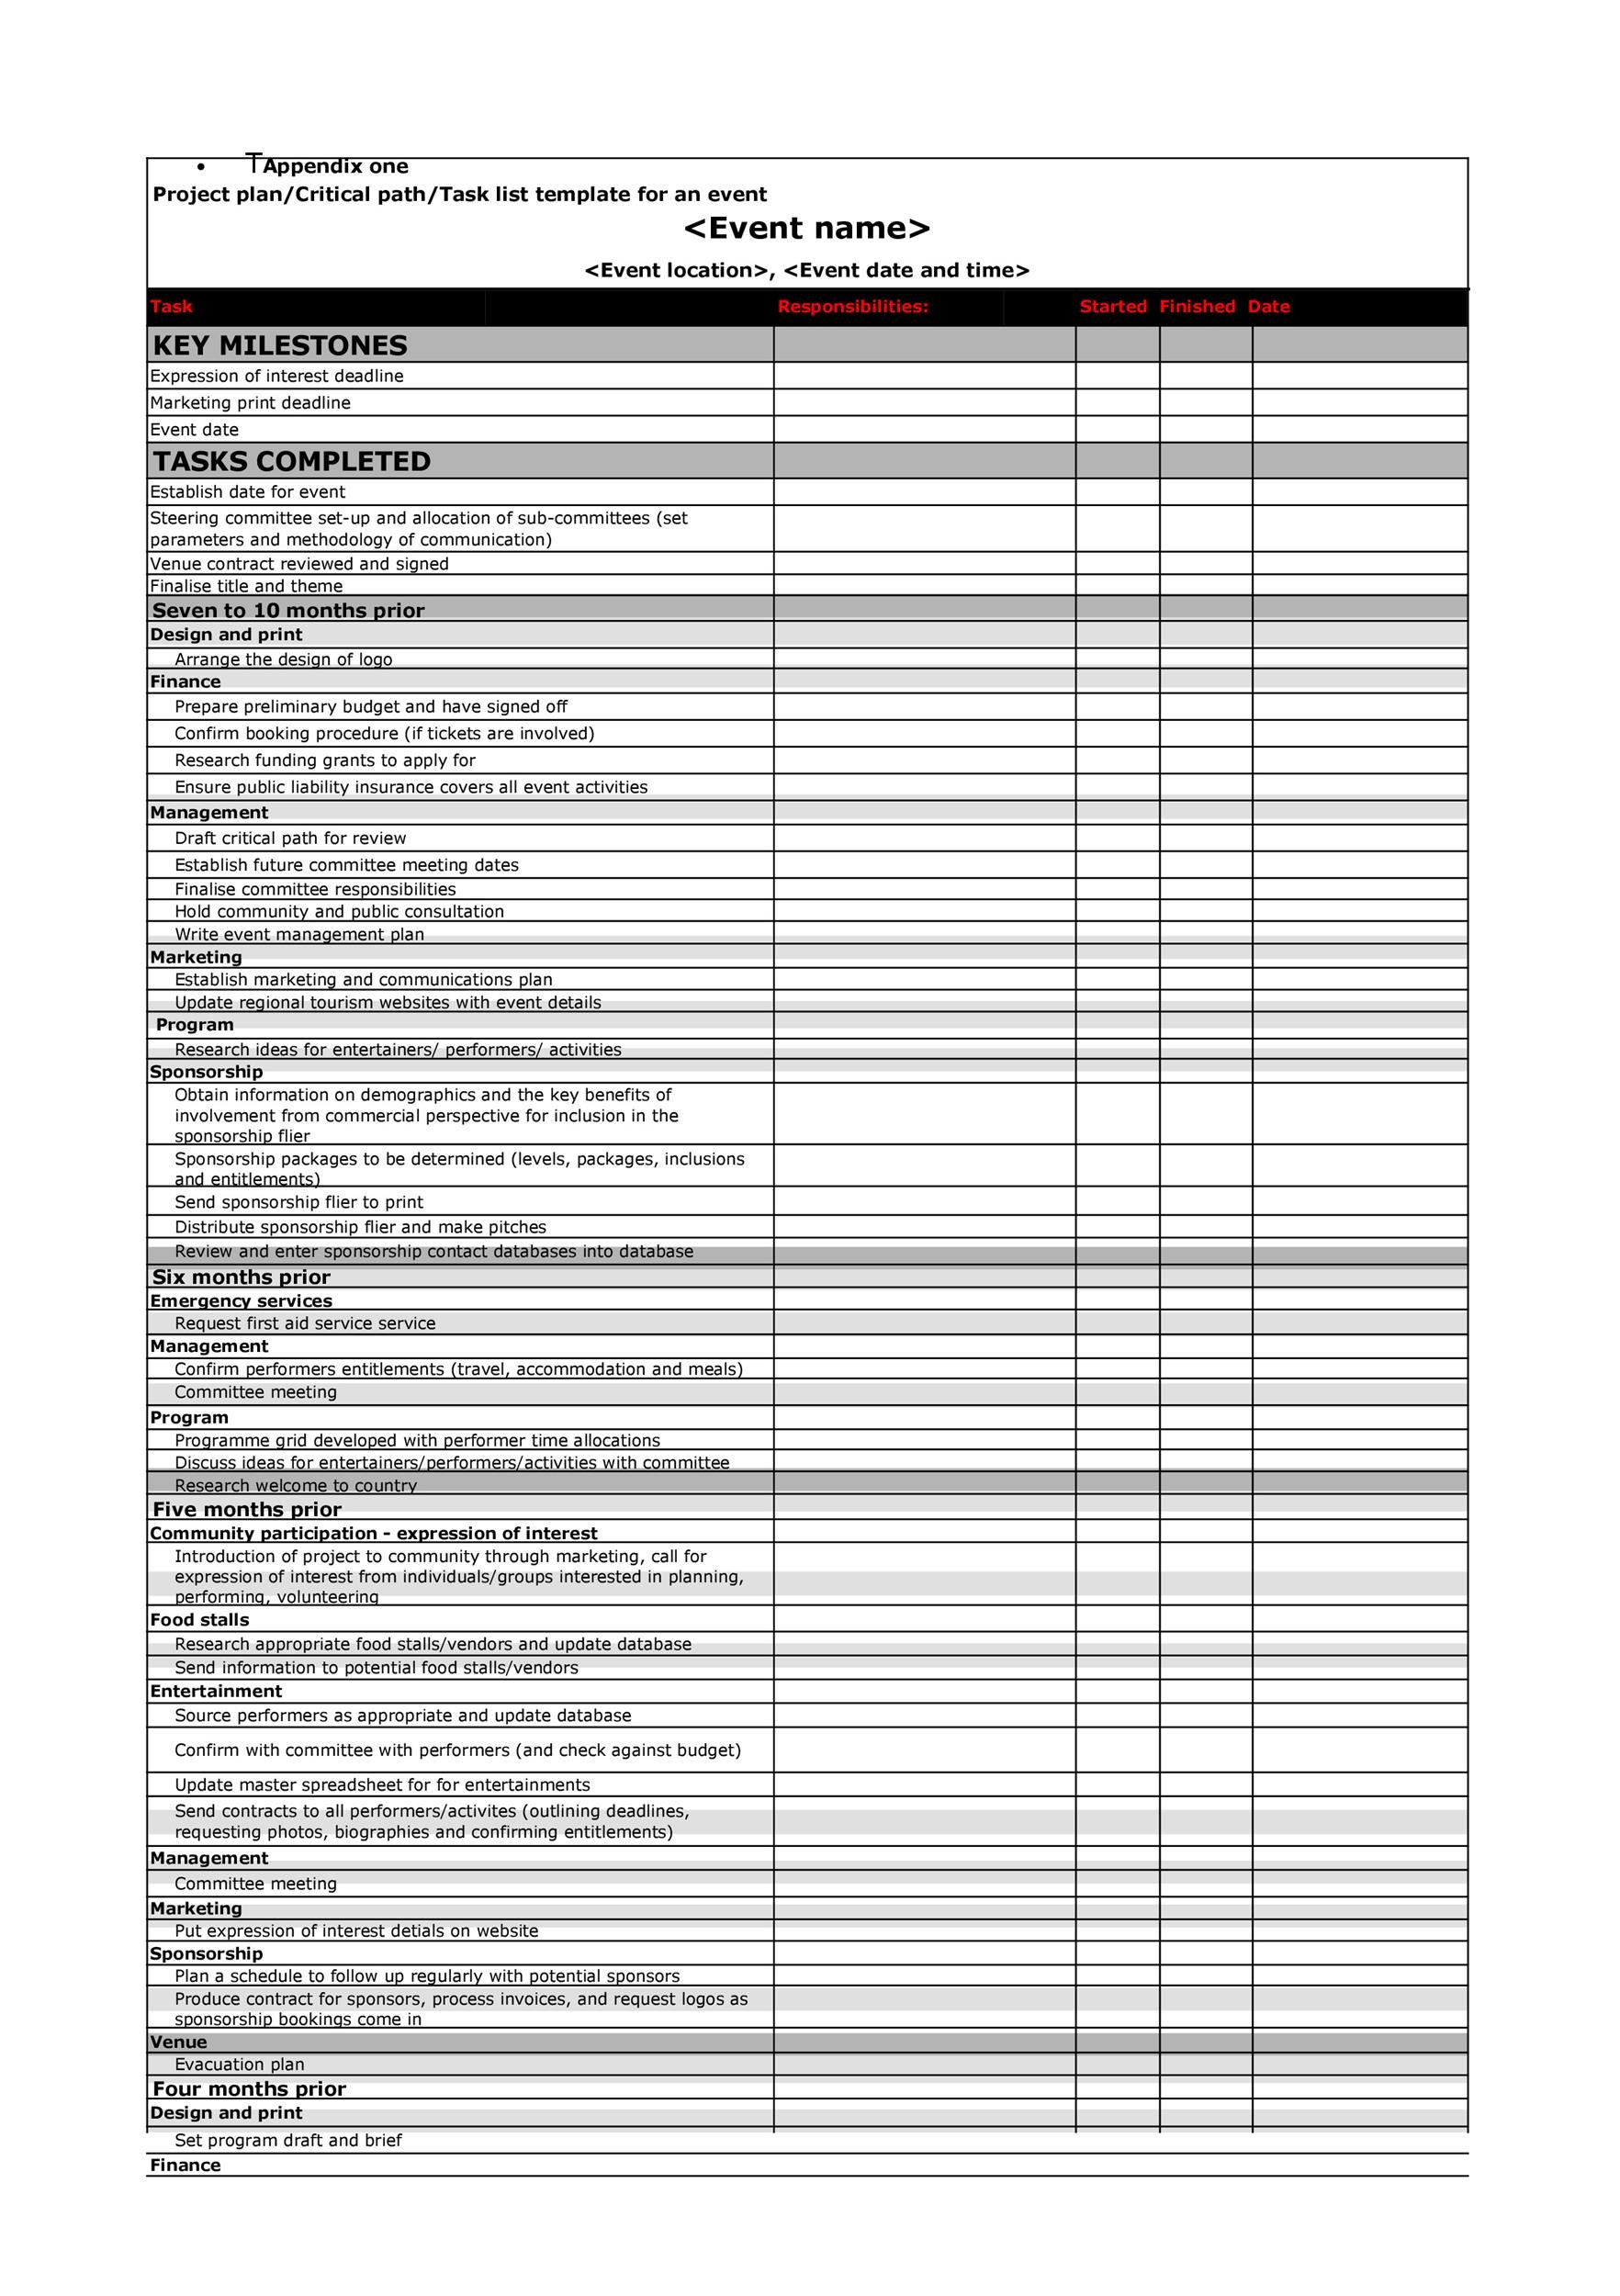 11 Professional Event Planning Checklist Templates ᐅ TemplateLab With Regard To Corporate Event Planning Checklist Template With Regard To Corporate Event Planning Checklist Template